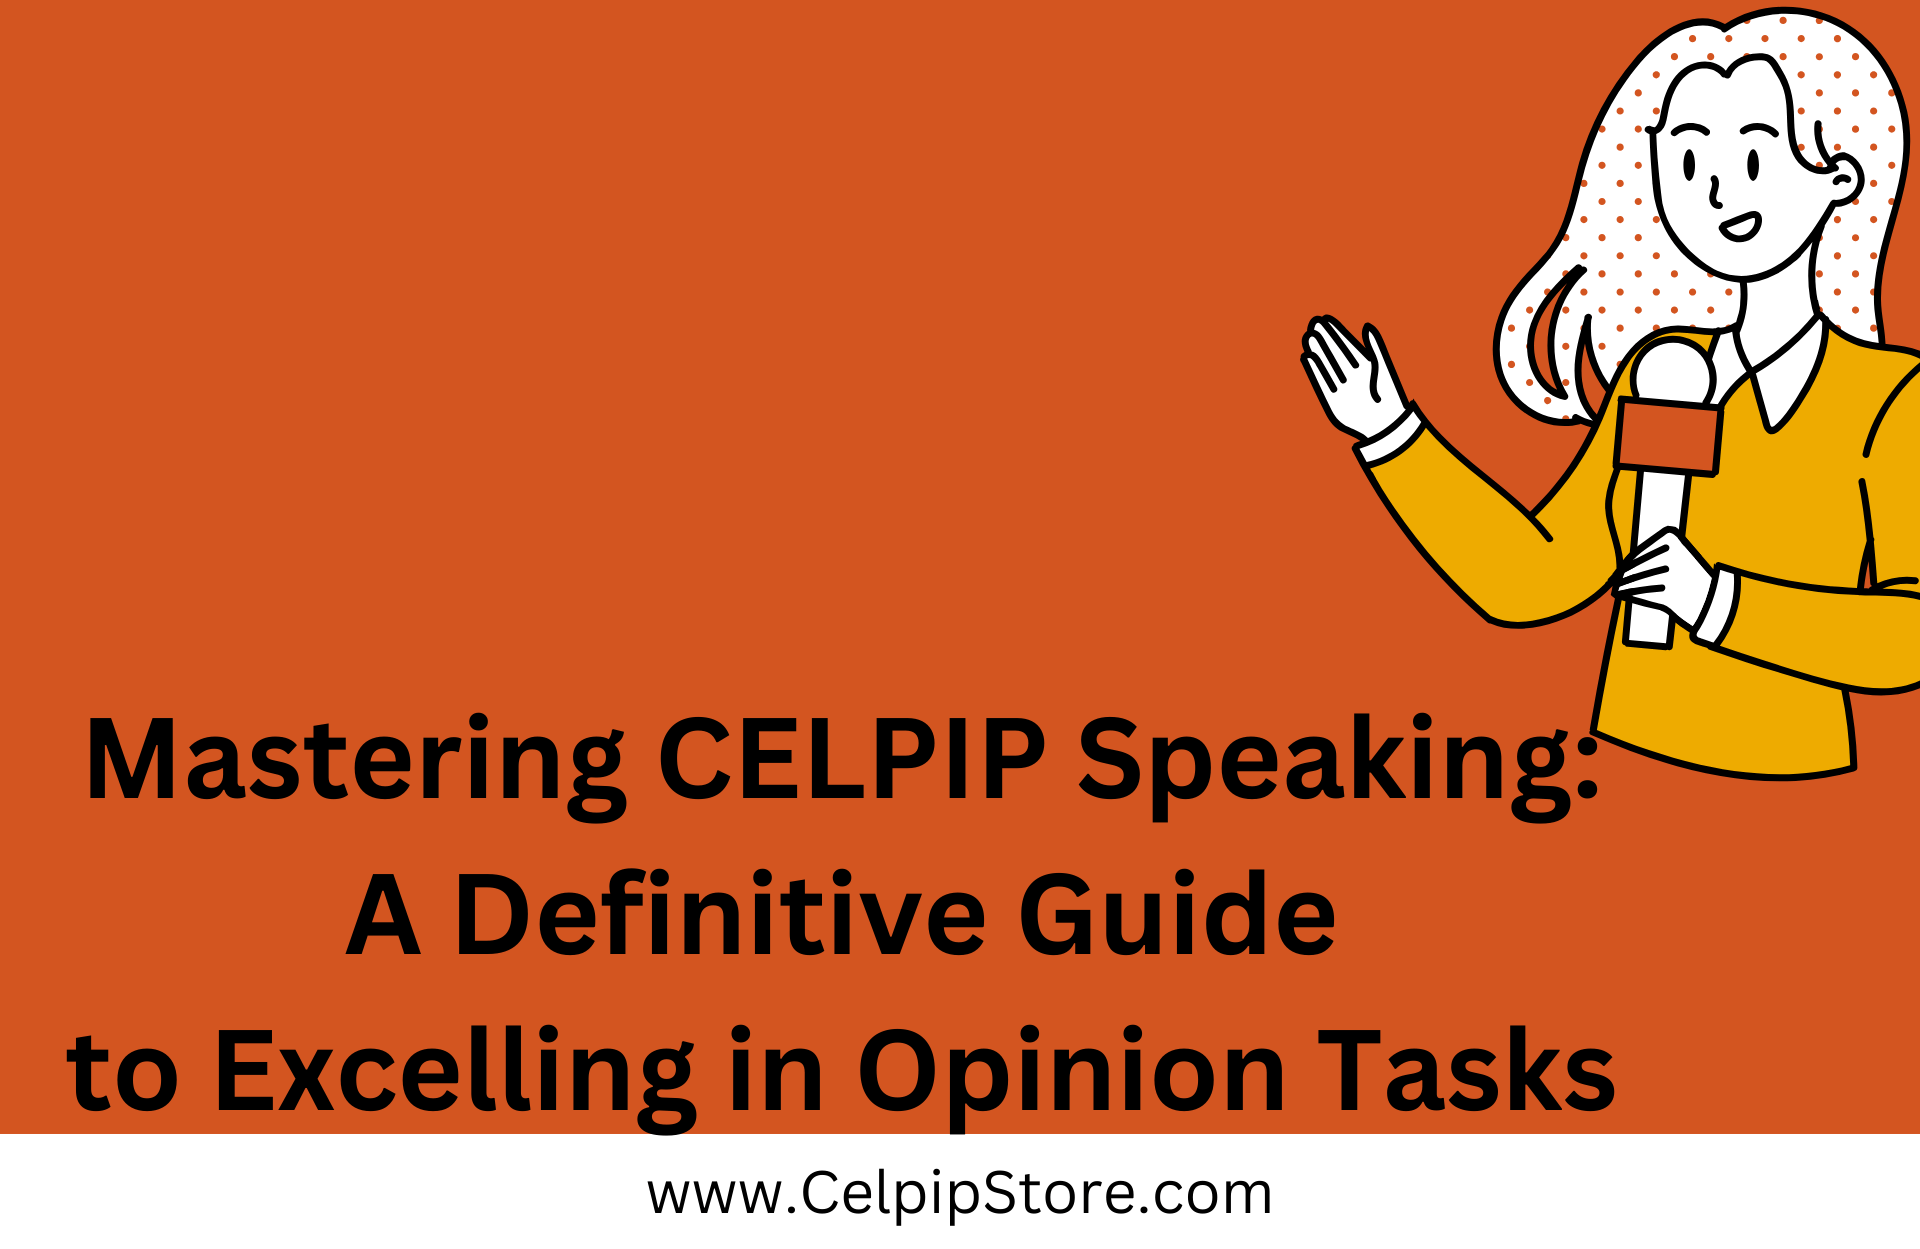 Mastering CELPIP Speaking: A Definitive Guide to Excelling in Opinion Tasks